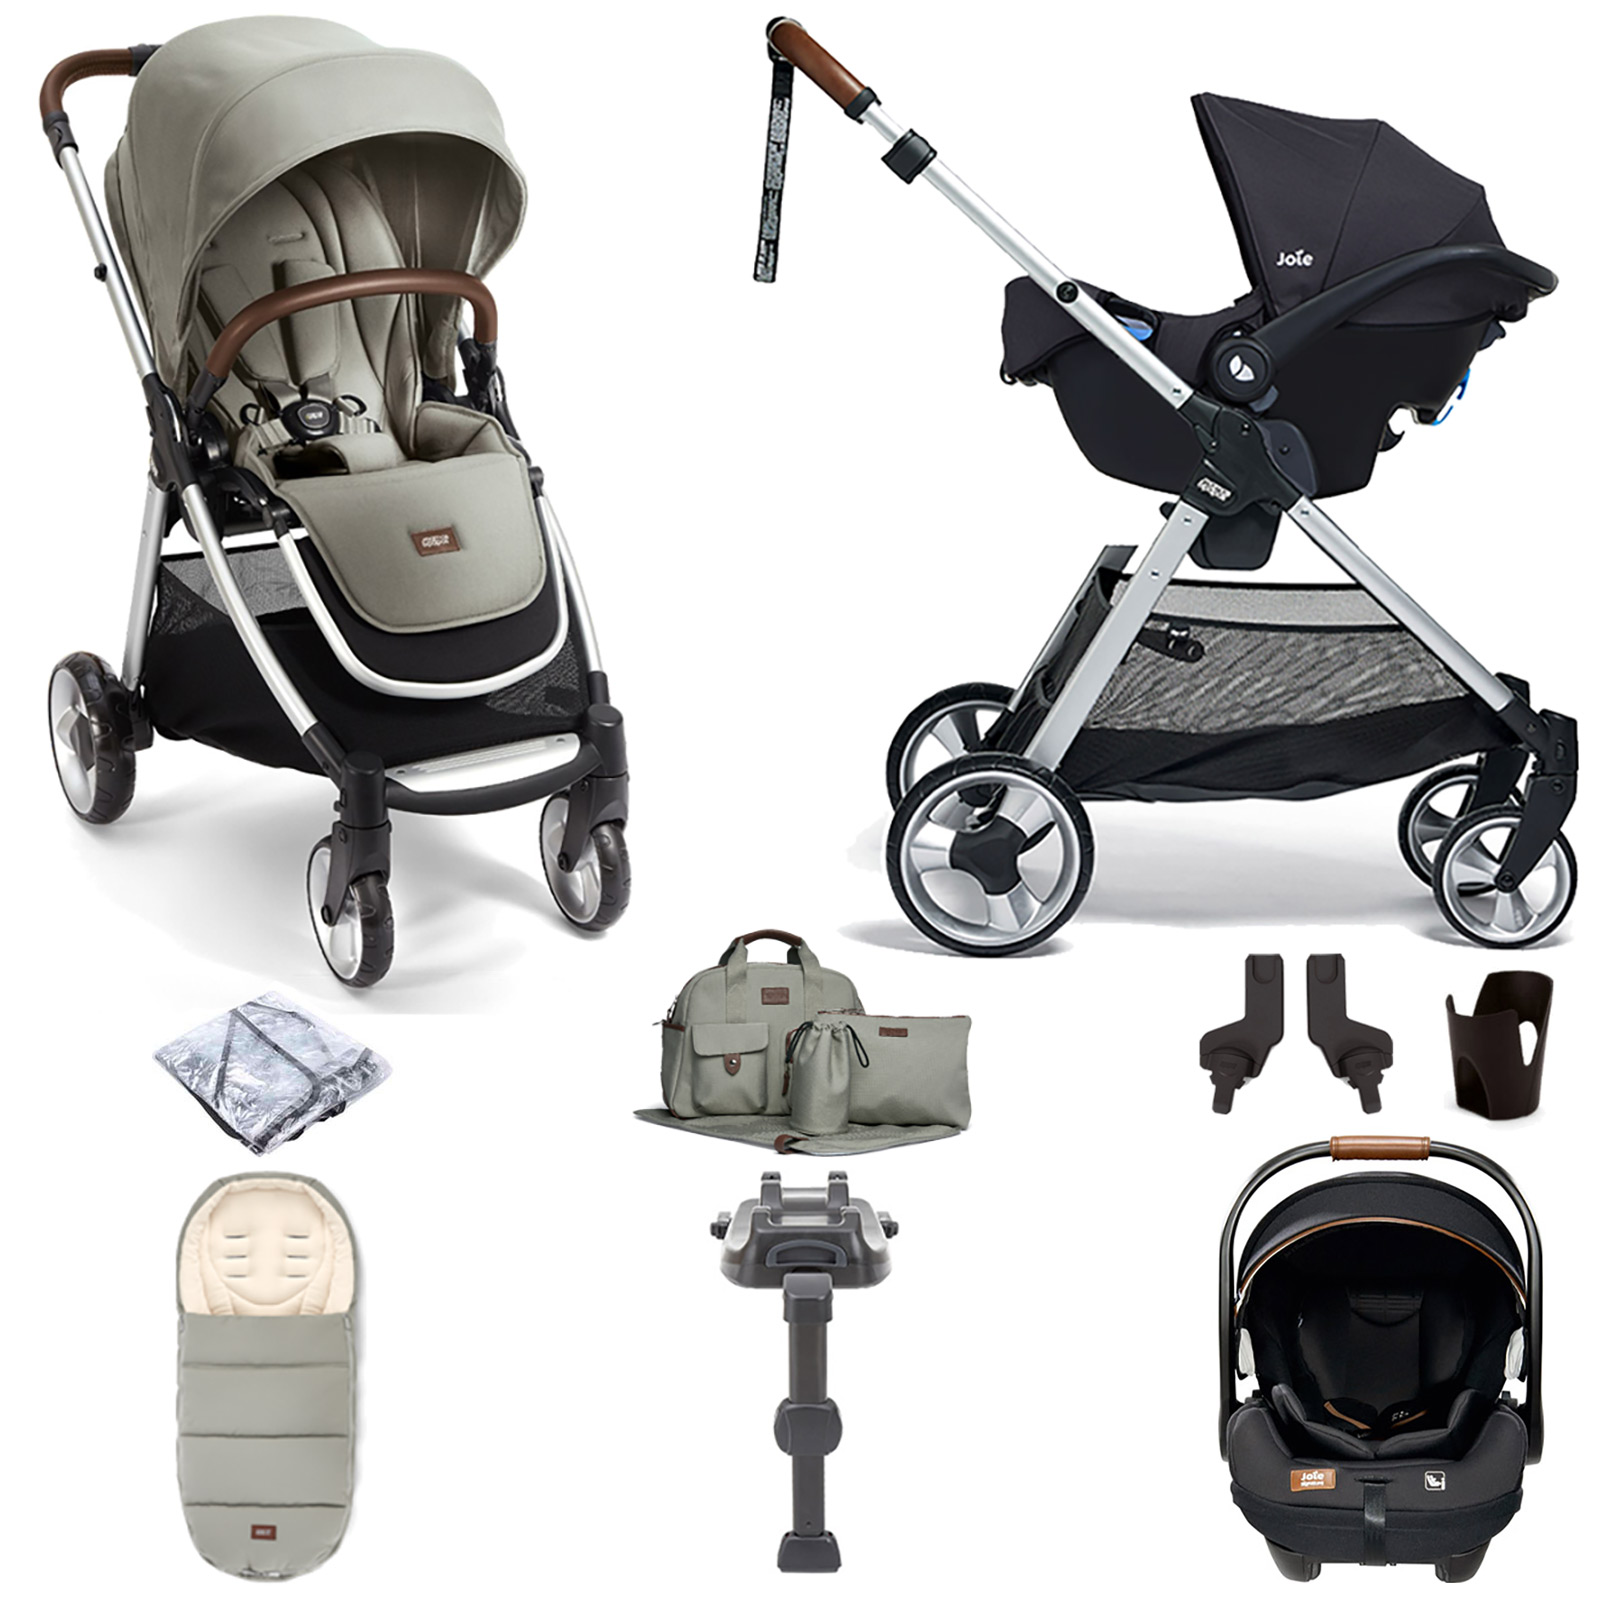 Mamas & Papas Flip XT2 Travel System with Accessories, i-Level Recline Car Seat & i-Base LX 2 - Sage Green